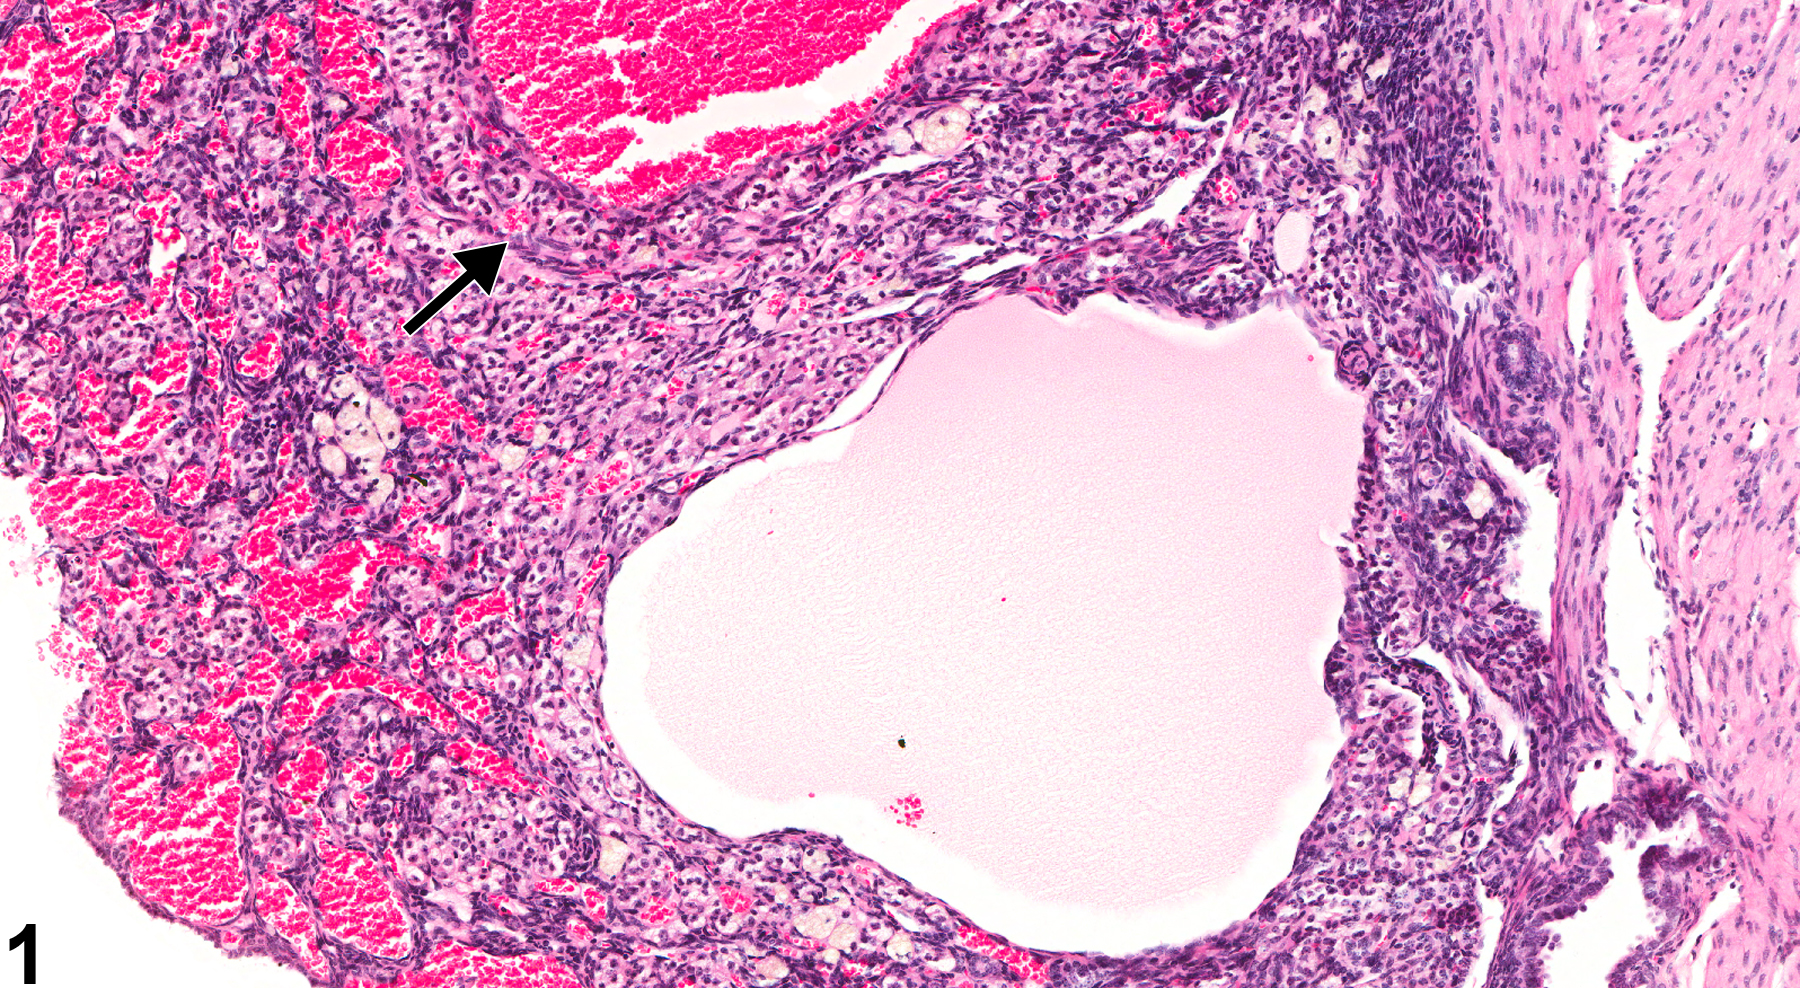 Image of cyst in the ovary from a female B6C3F1 mouse in a chronic study